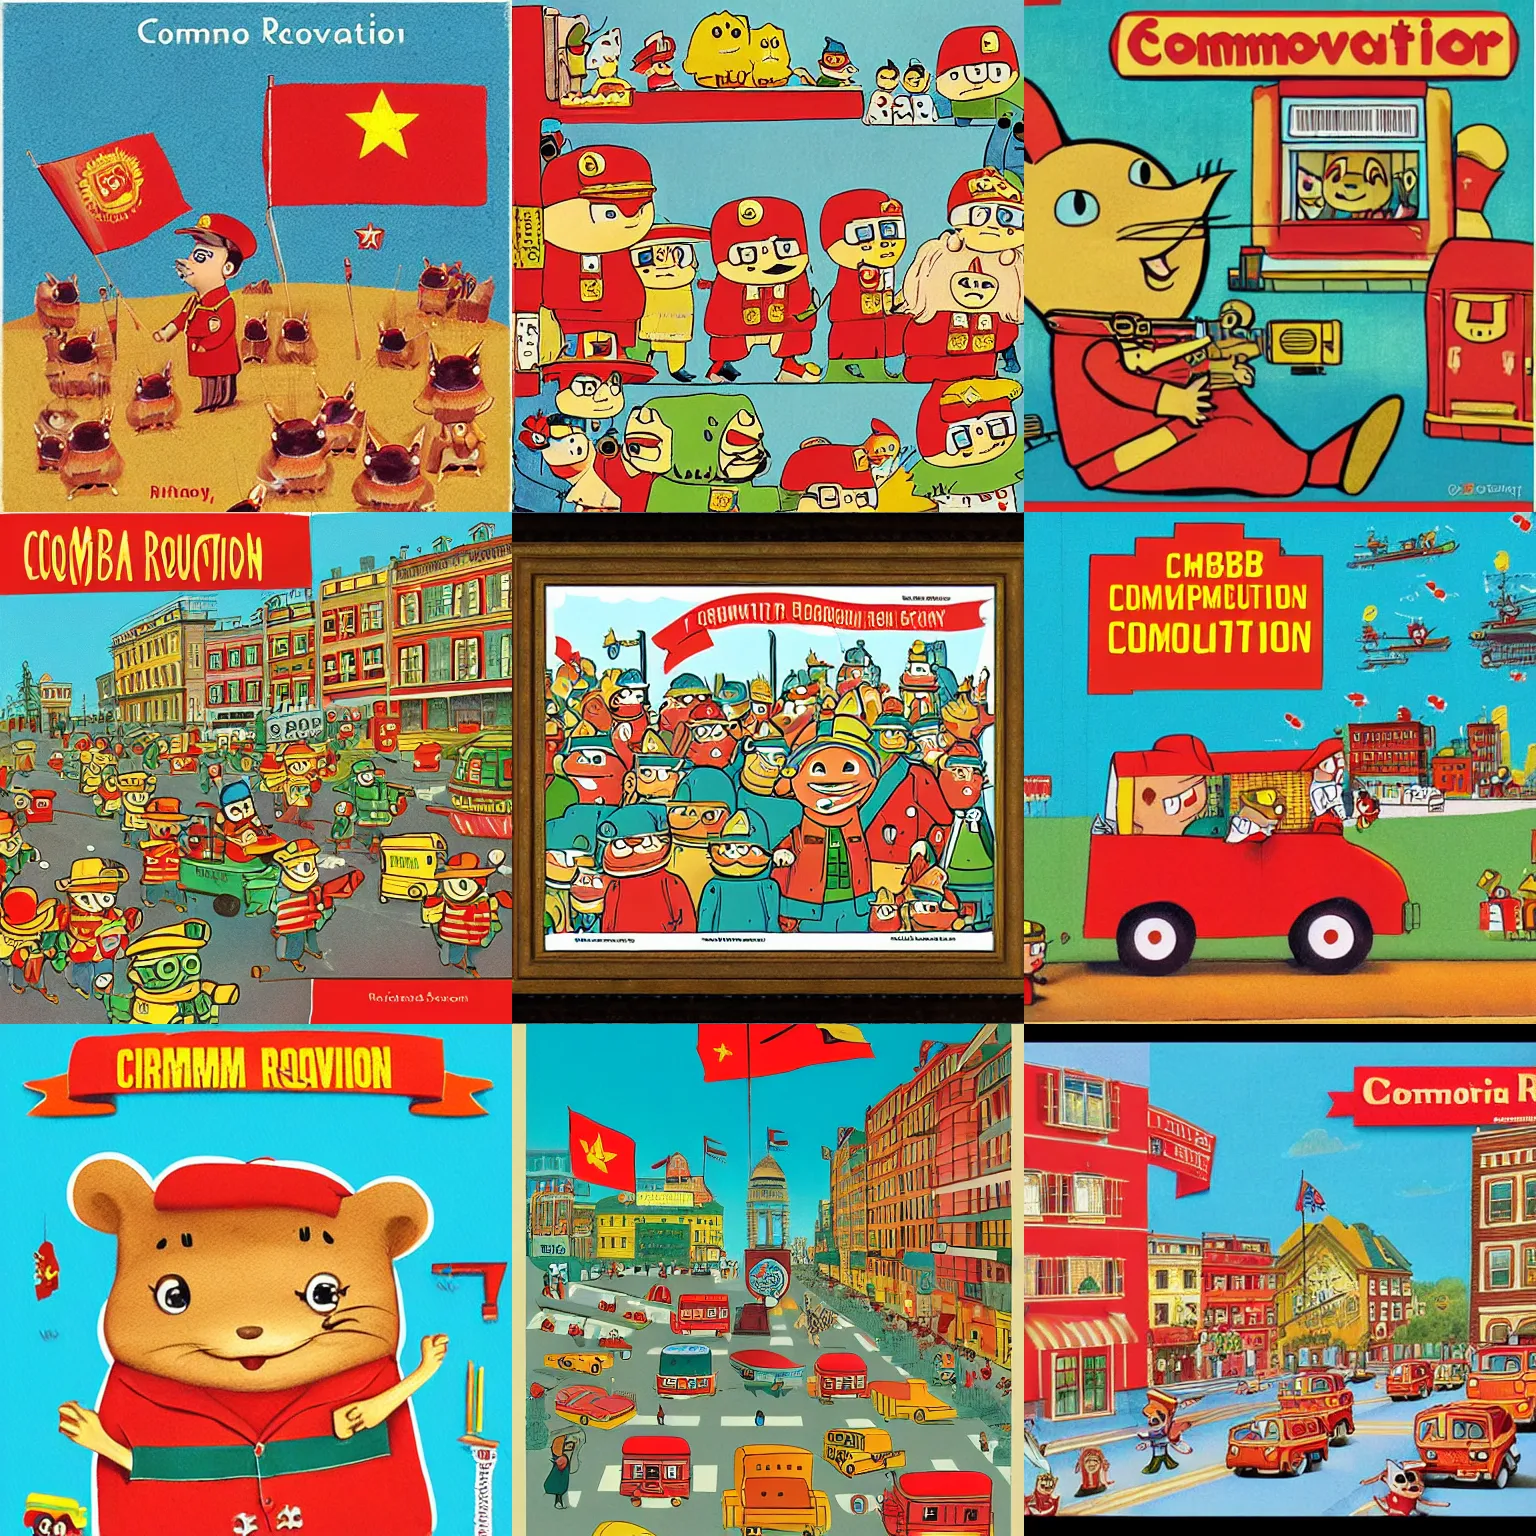 Prompt: communist revolution by richard scarry, detailed, soft colors